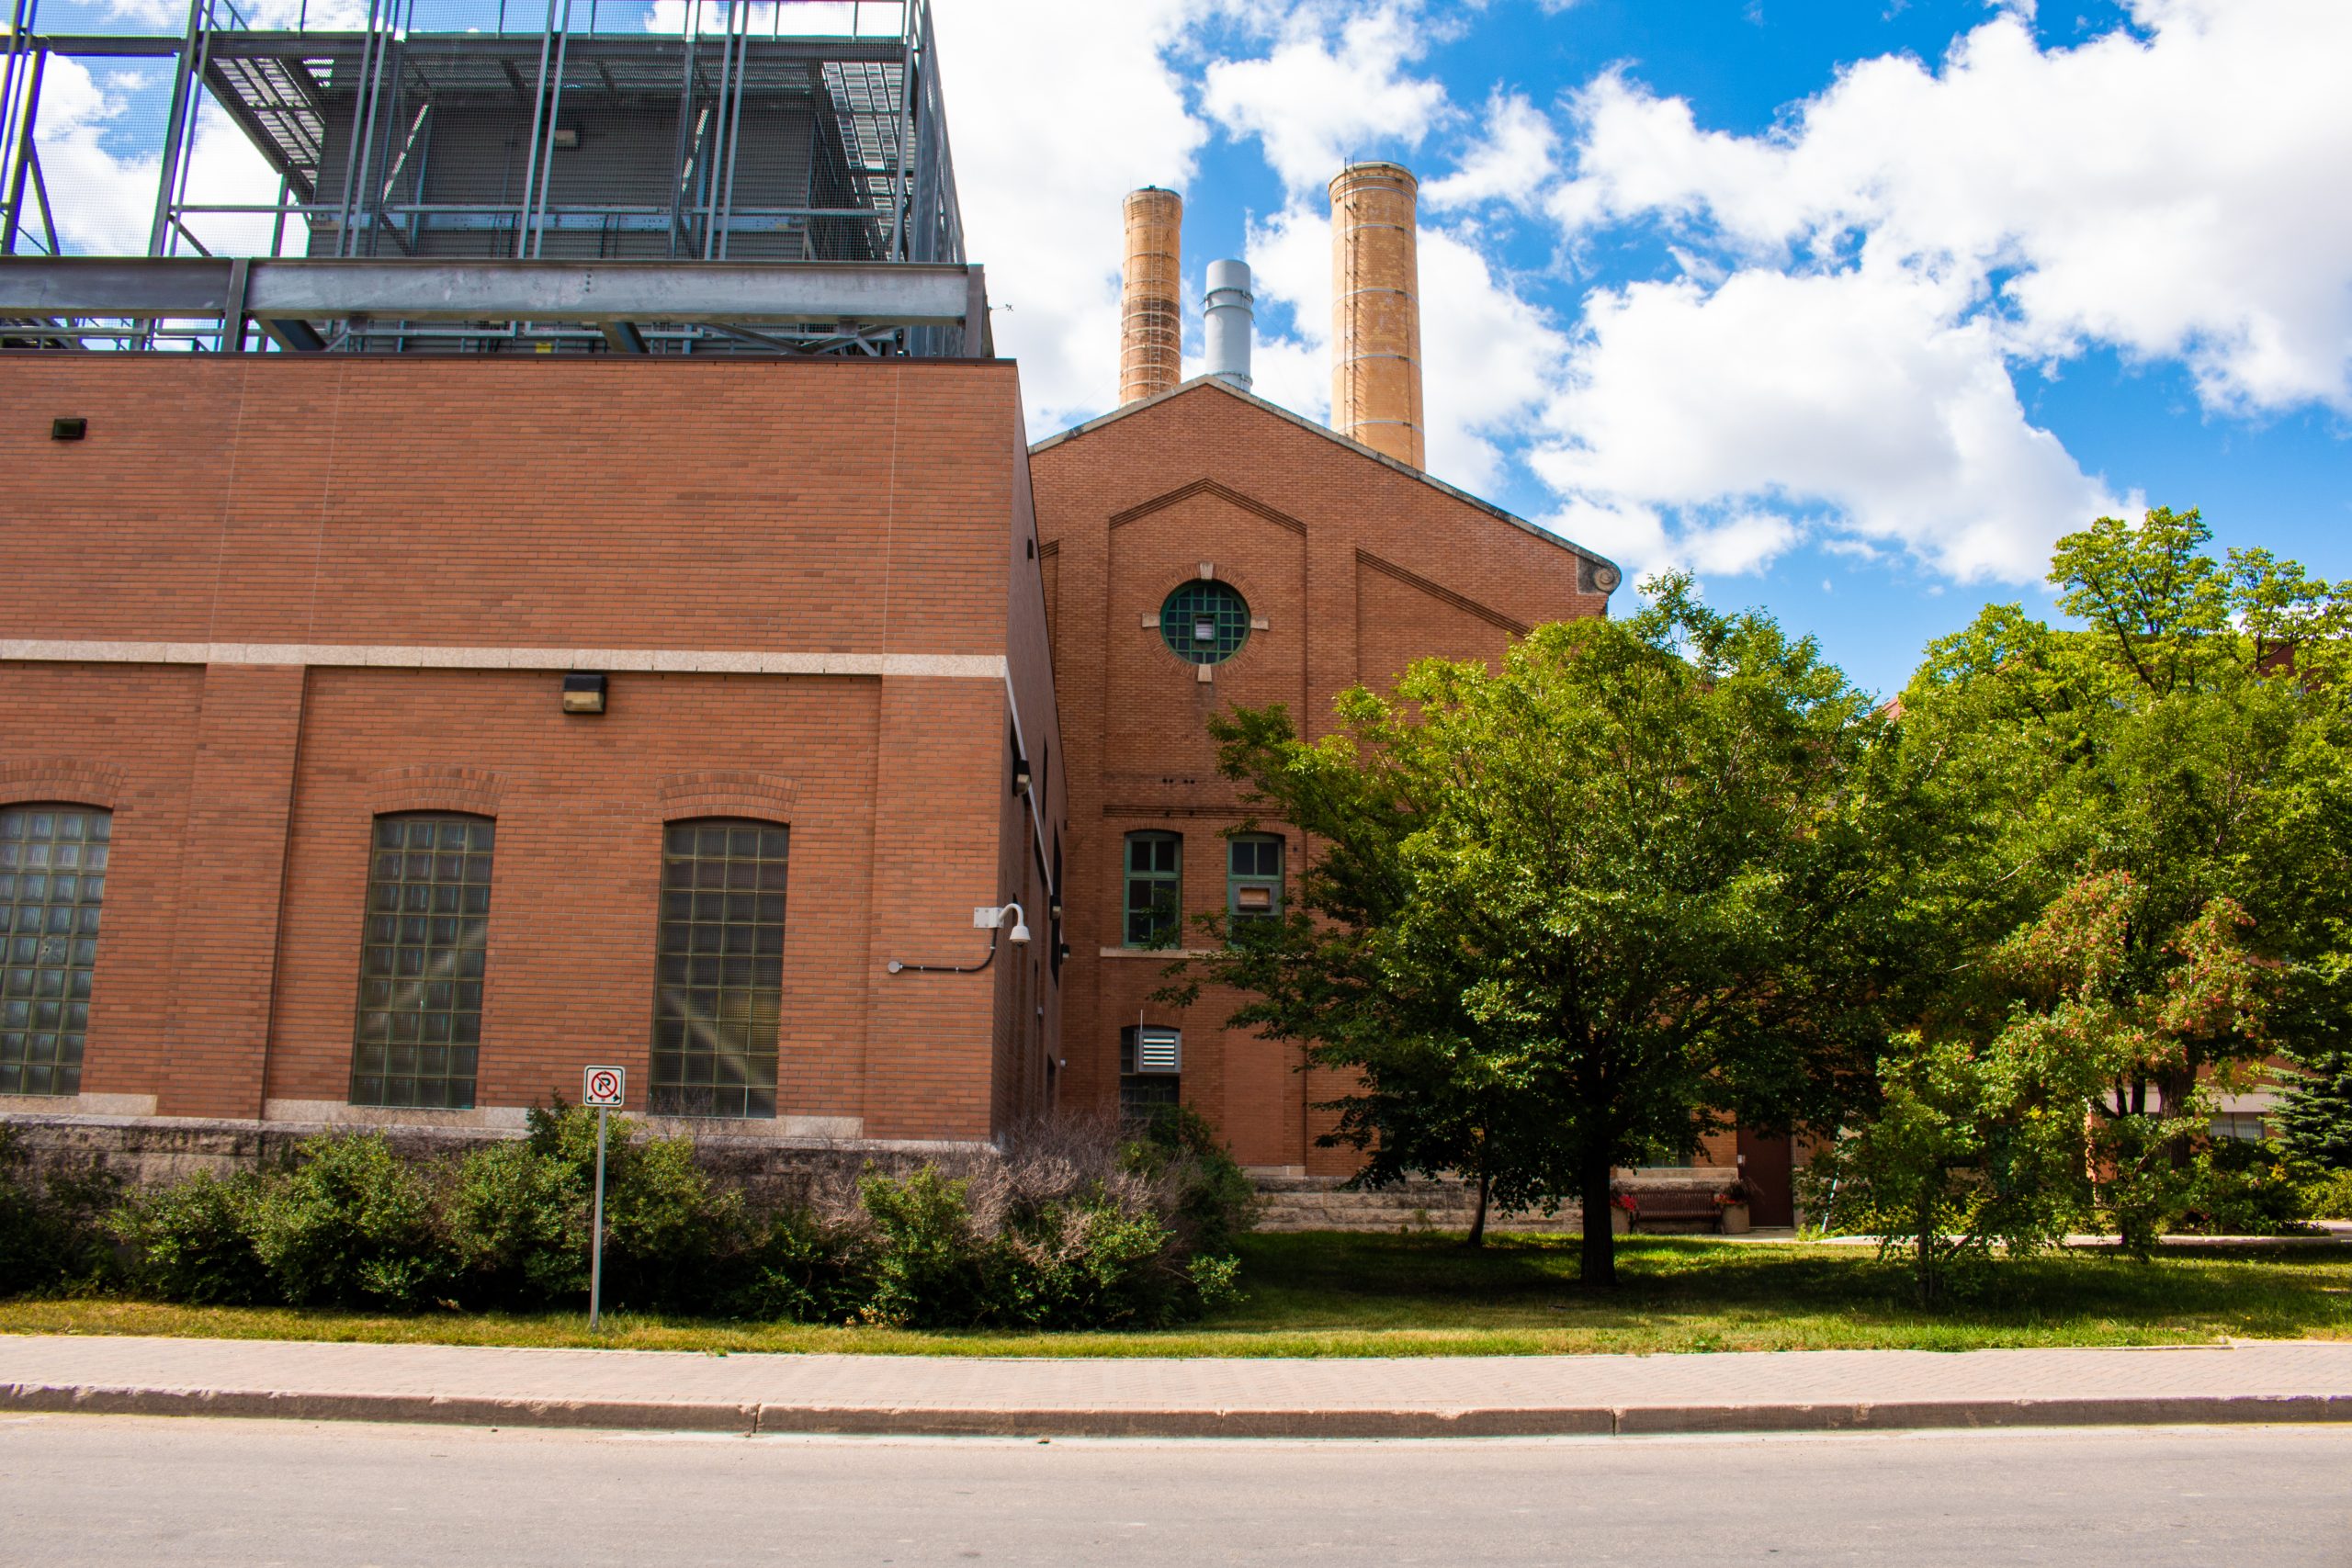 Image of the former Agricultural College Powerhouse on the University of Manitoba campus at 33 Maclean Crescent